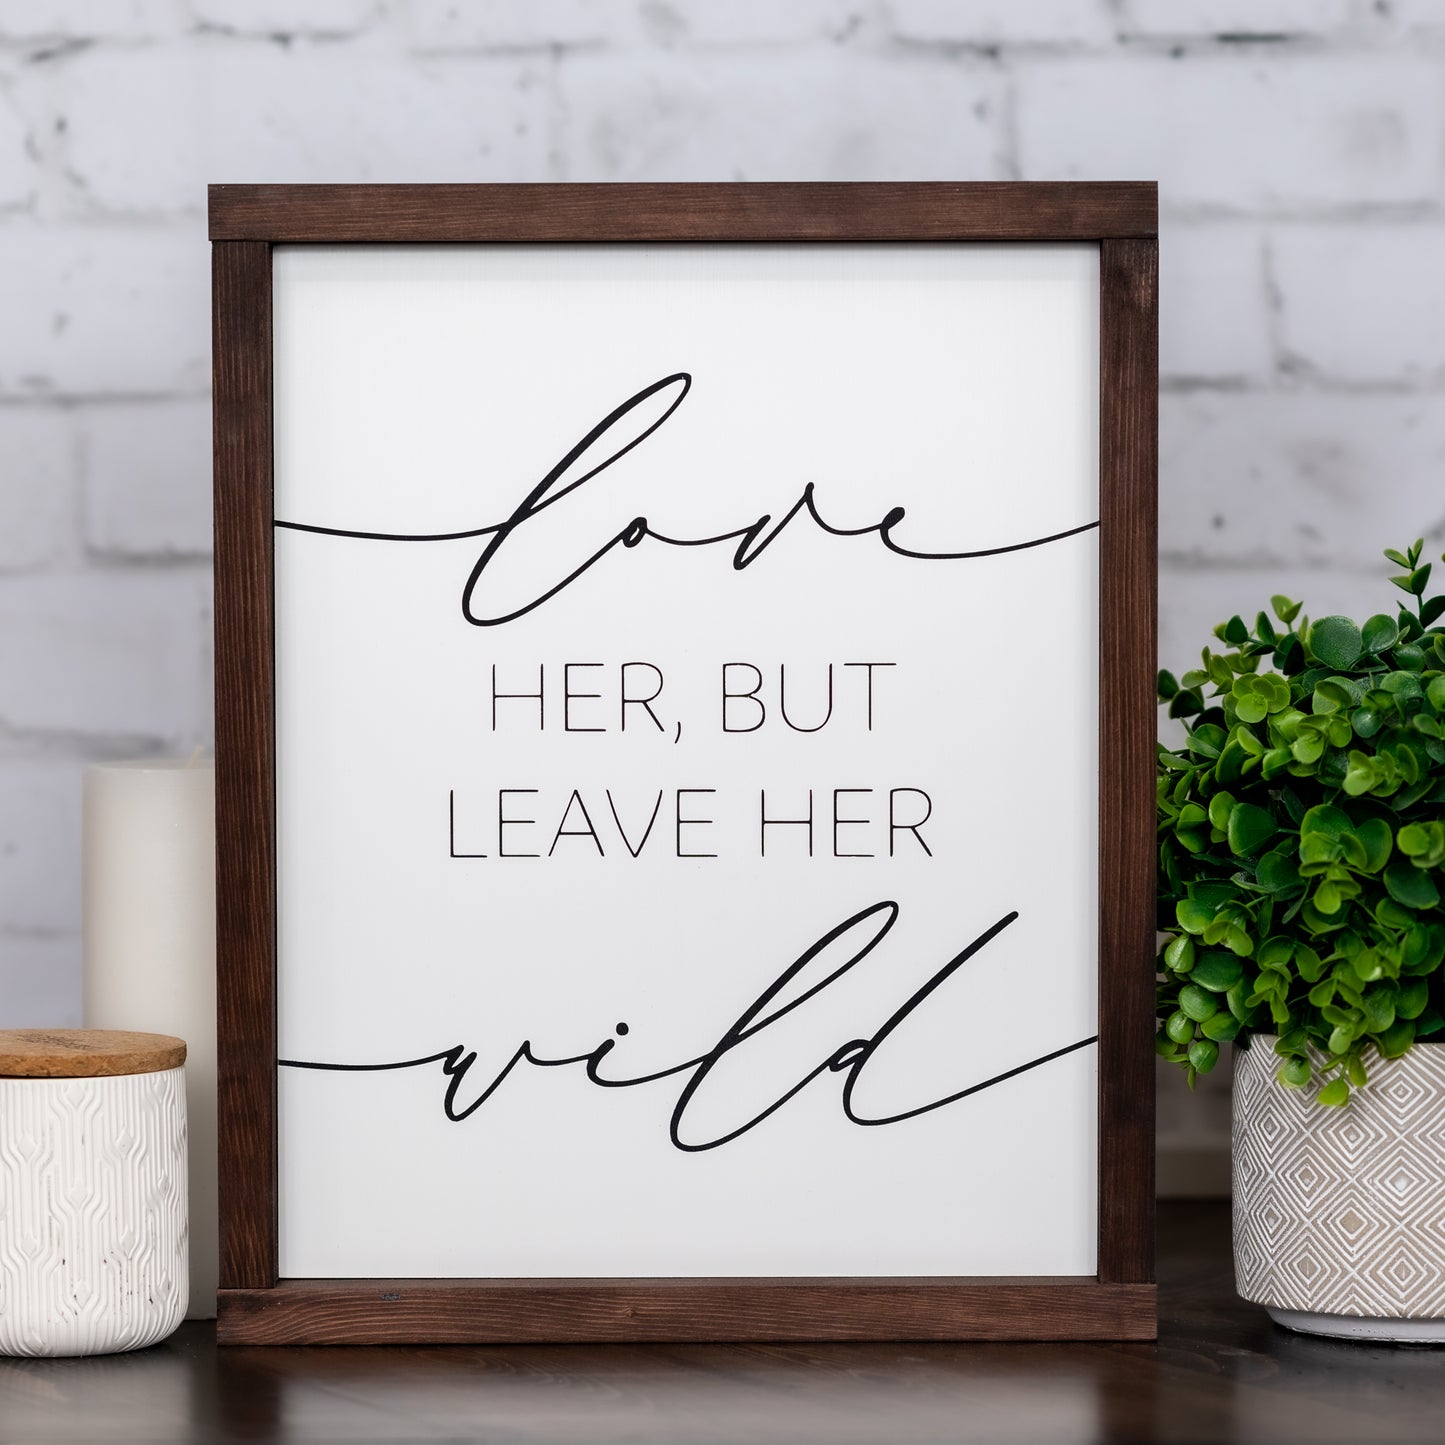 love her but leave her wild ~ wood sign